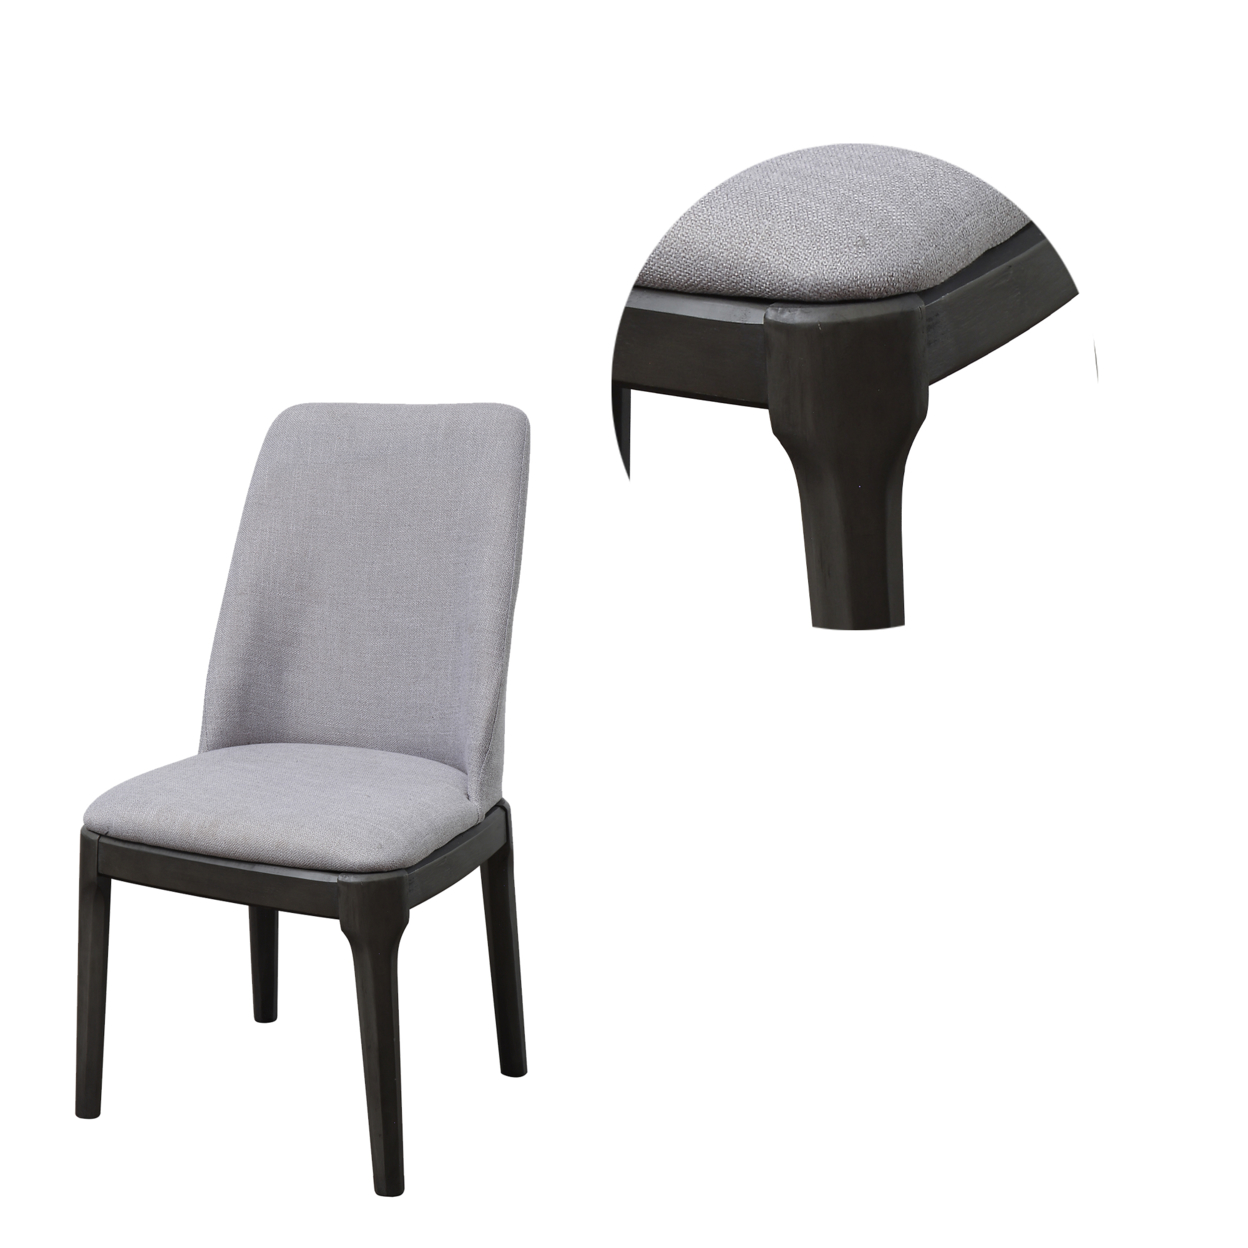 Linen Upholstered Wooden Side Chair With Curved Backrest And Block Legs, Set Of 2, Gray- Saltoro Sherpi